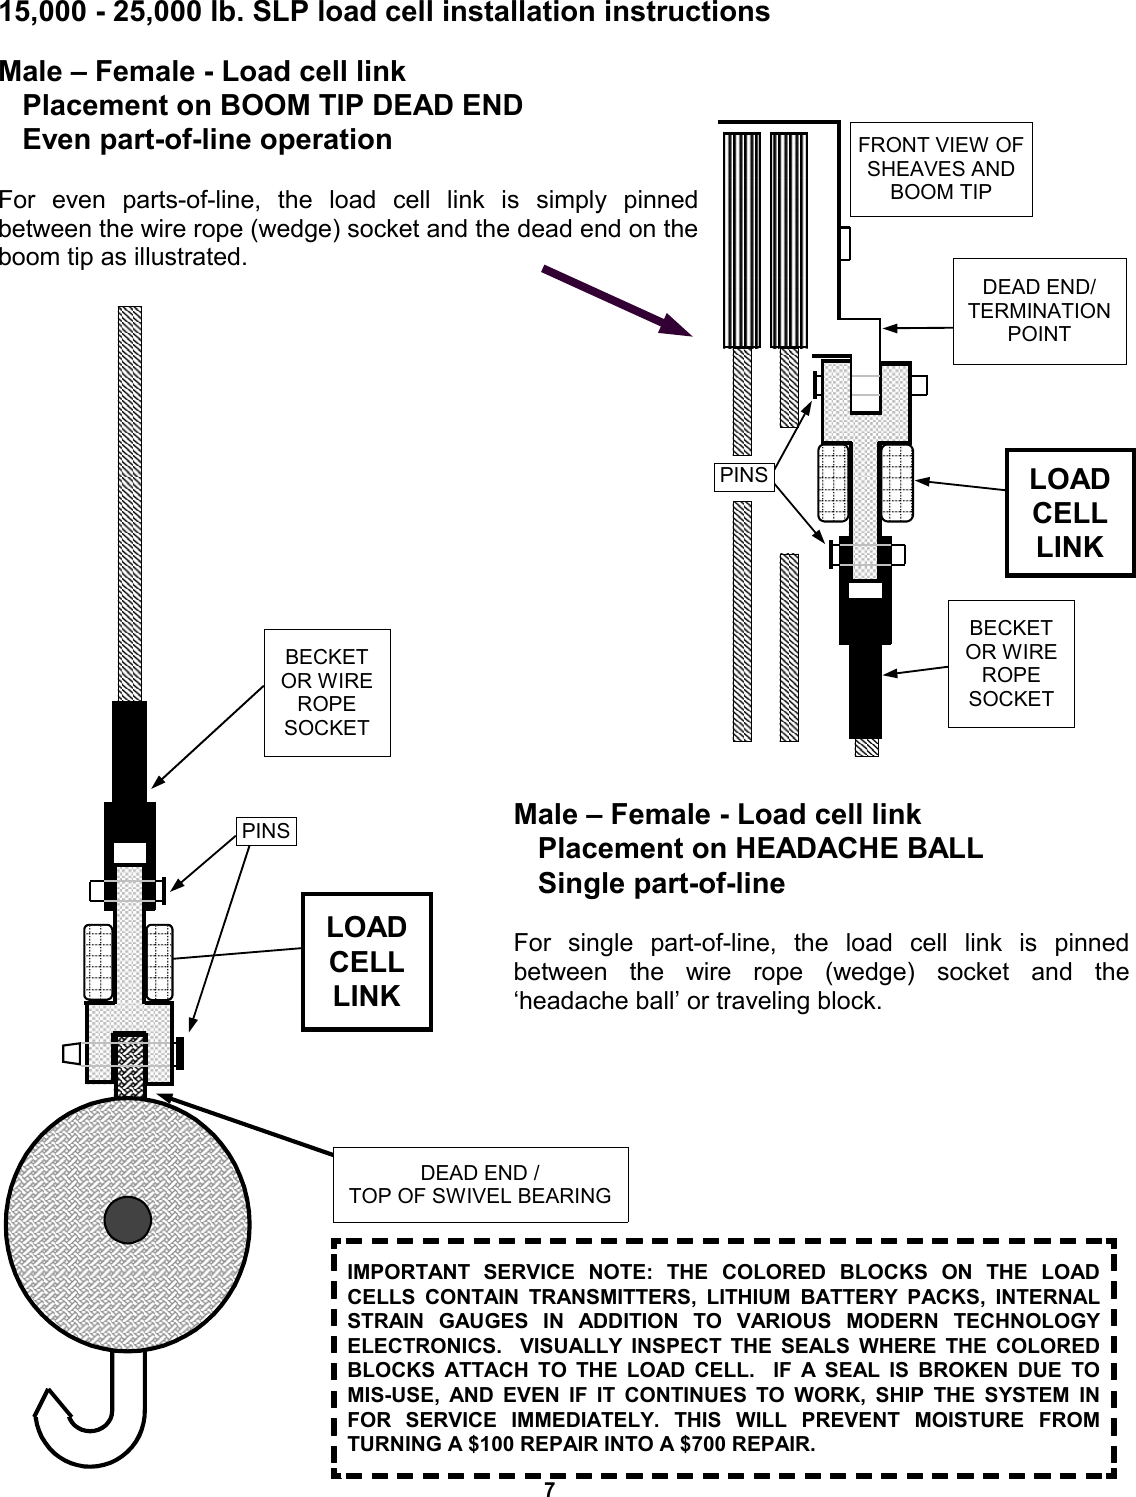 7 Male – Female - Load cell link     Placement on BOOM TIP DEAD END       Even part-of-line operation  For even parts-of-line, the load cell link  is  simply  pinned        between the wire rope (wedge) socket and the dead end on the boom tip as illustrated. Male – Female - Load cell link     Placement on HEADACHE BALL    Single part-of-line        For single part-of-line, the load cell link is pinned       between the wire rope (wedge) socket and the ‘headache ball’ or traveling block.  LOAD CELL LINK BECKET OR WIRE ROPE SOCKET PINS IMPORTANT SERVICE NOTE: THE COLORED BLOCKS ON THE LOAD CELLS CONTAIN TRANSMITTERS, LITHIUM BATTERY PACKS, INTERNAL STRAIN GAUGES IN ADDITION TO VARIOUS MODERN TECHNOLOGY ELECTRONICS.  VISUALLY INSPECT THE SEALS WHERE THE COLORED BLOCKS ATTACH TO THE LOAD CELL.  IF A SEAL IS BROKEN DUE TO MIS-USE, AND EVEN IF IT CONTINUES TO WORK, SHIP THE SYSTEM IN FOR SERVICE IMMEDIATELY. THIS WILL PREVENT MOISTURE FROM TURNING A $100 REPAIR INTO A $700 REPAIR. LOAD CELL LINK BECKET OR WIRE ROPE SOCKET DEAD END/ TERMINATION POINT FRONT VIEW OF SHEAVES AND BOOM TIP PINS 15,000 - 25,000 lb. SLP load cell installation instructions DEAD END /  TOP OF SWIVEL BEARING 